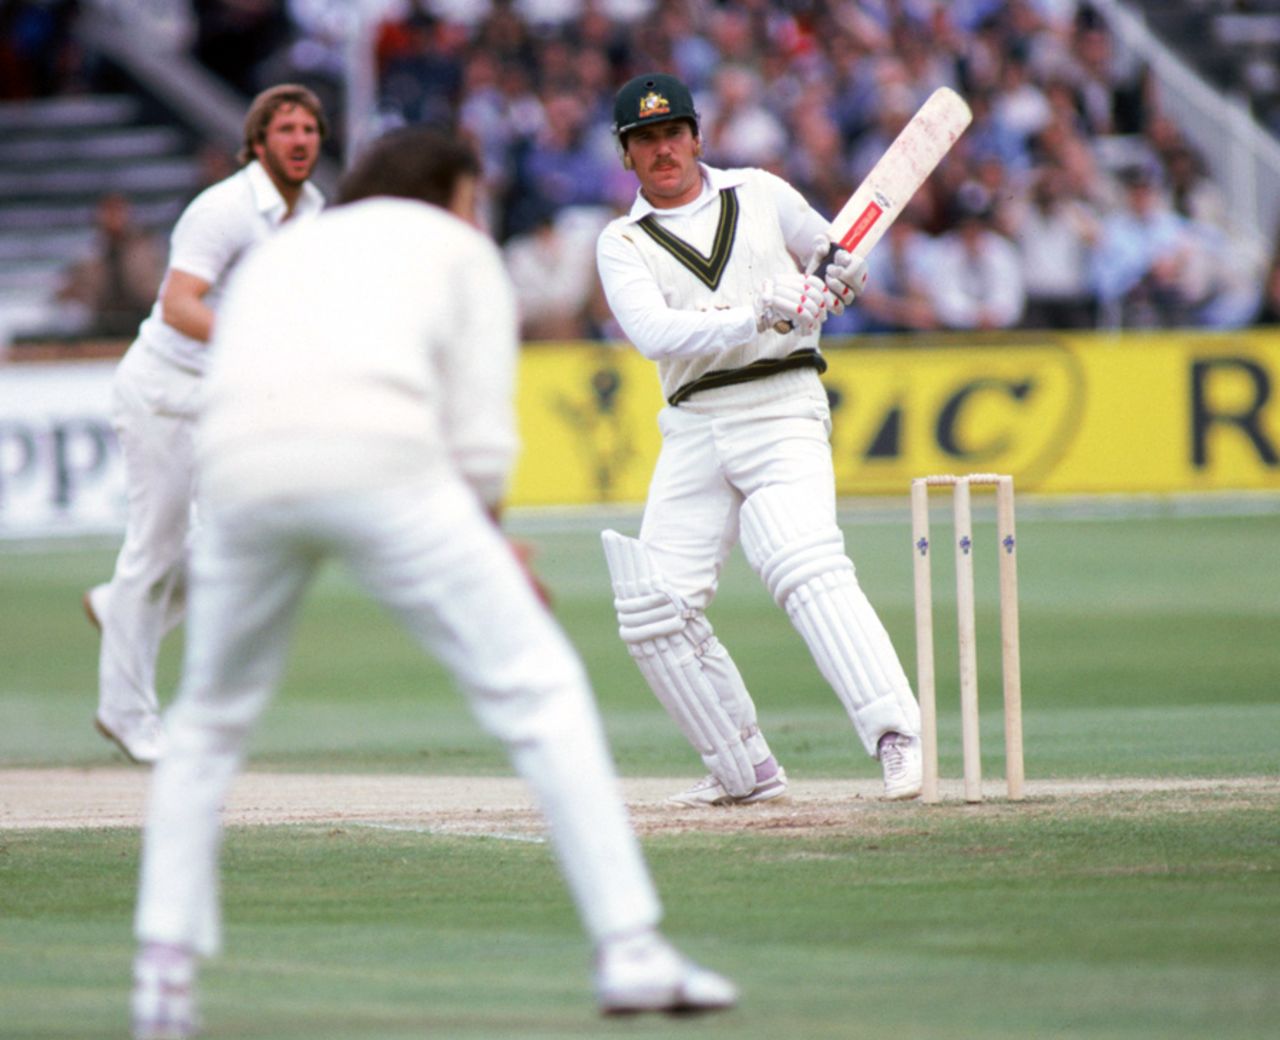 Allan Border top-scored in the match with 63, England v Australia, 1st Test, Trent Bridge, 2nd day, June 19, 1981